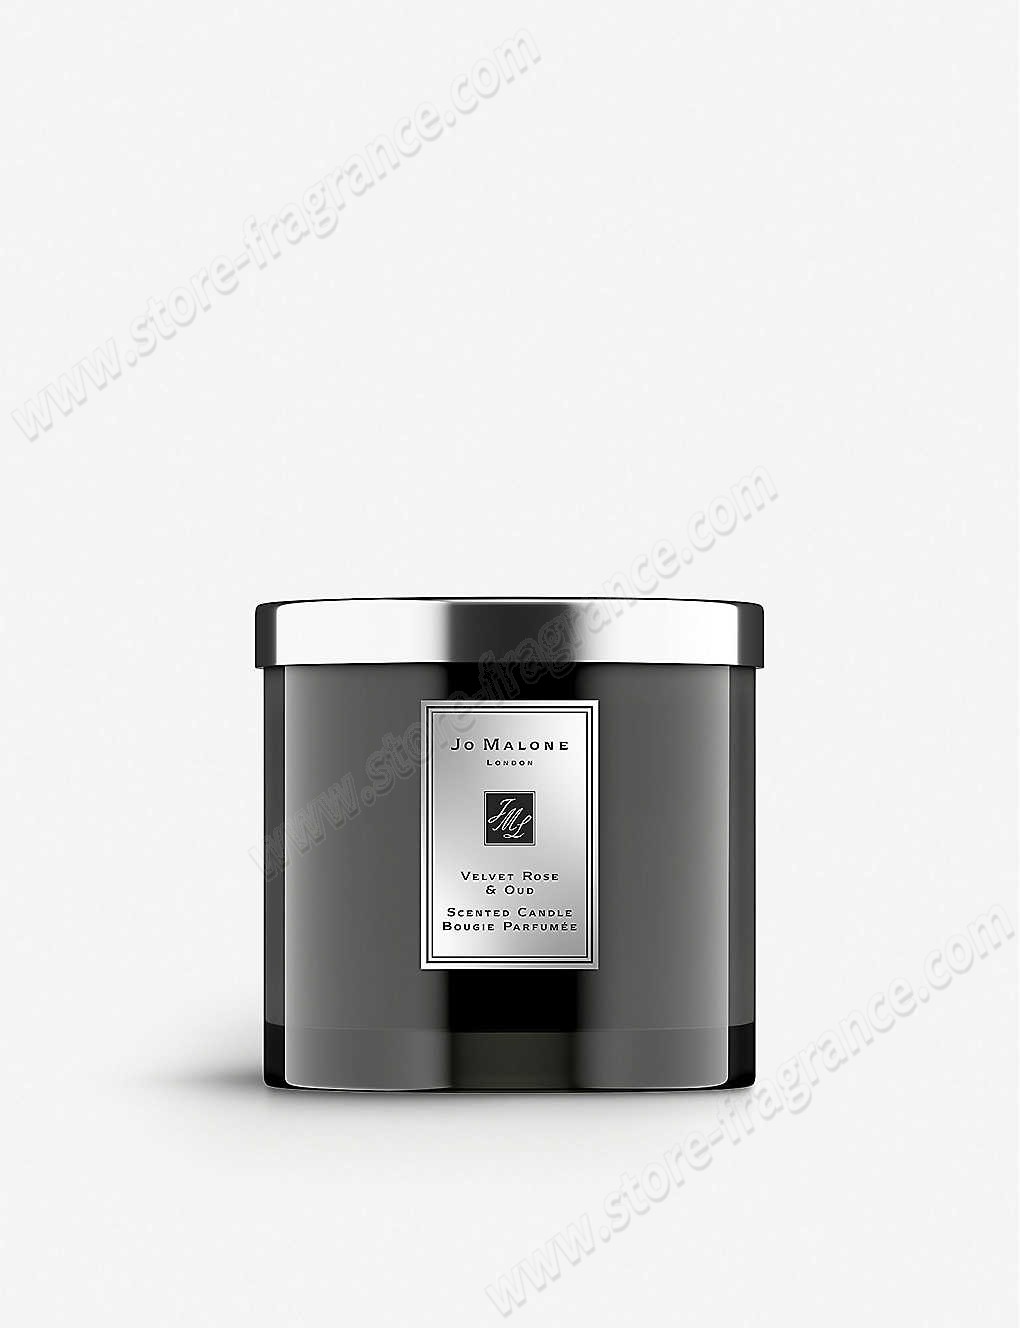 JO MALONE LONDON/Velvet Rose & Oud deluxe candle 600g ✿ Discount Store - -0